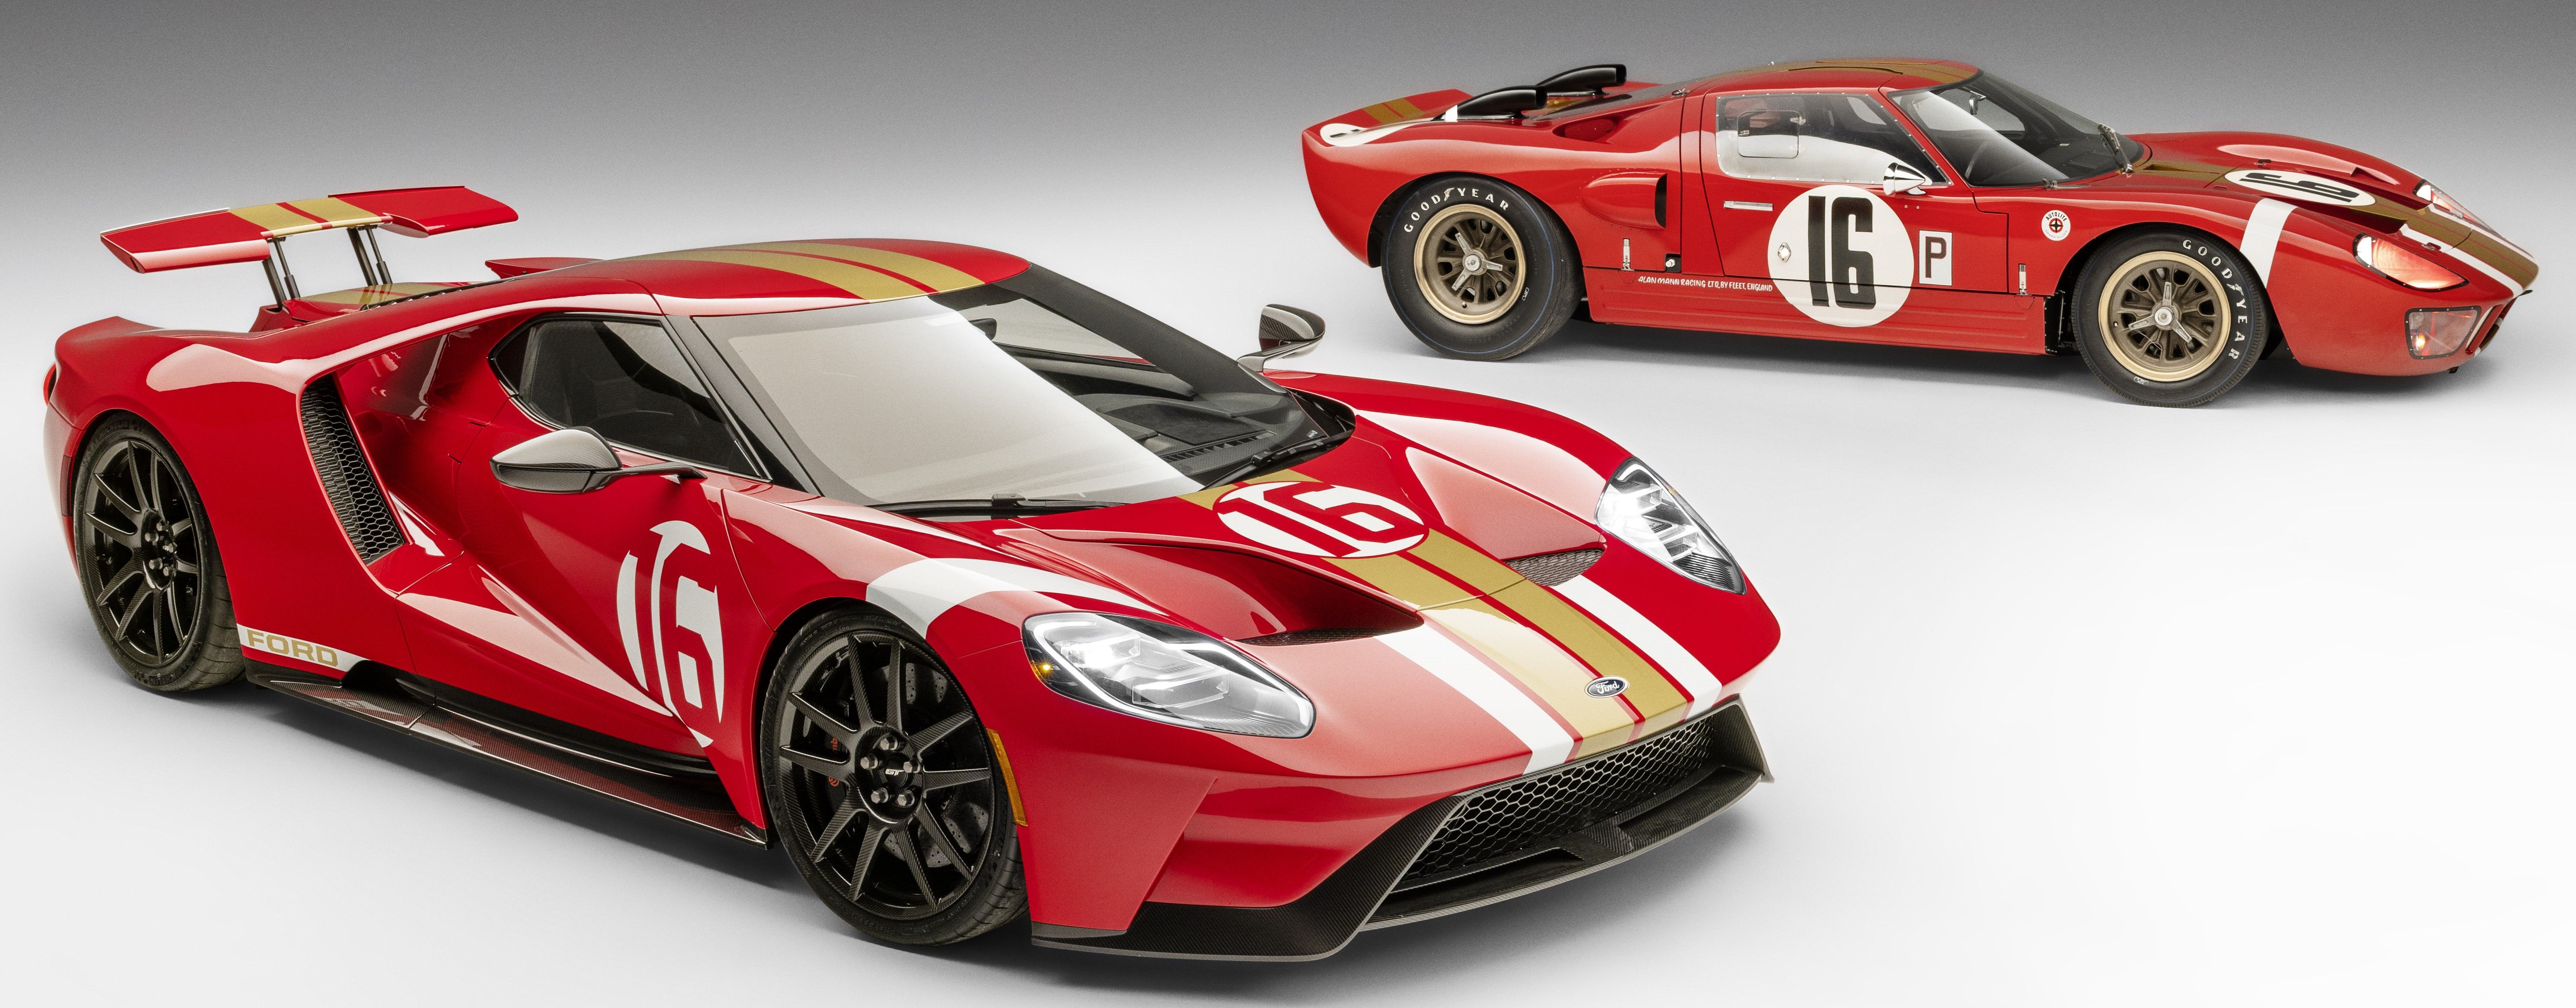 Red 2022 Ford GT Alan Mann Heritage Edition parked along with a first-generation Ford GT indoors under studio lighting 